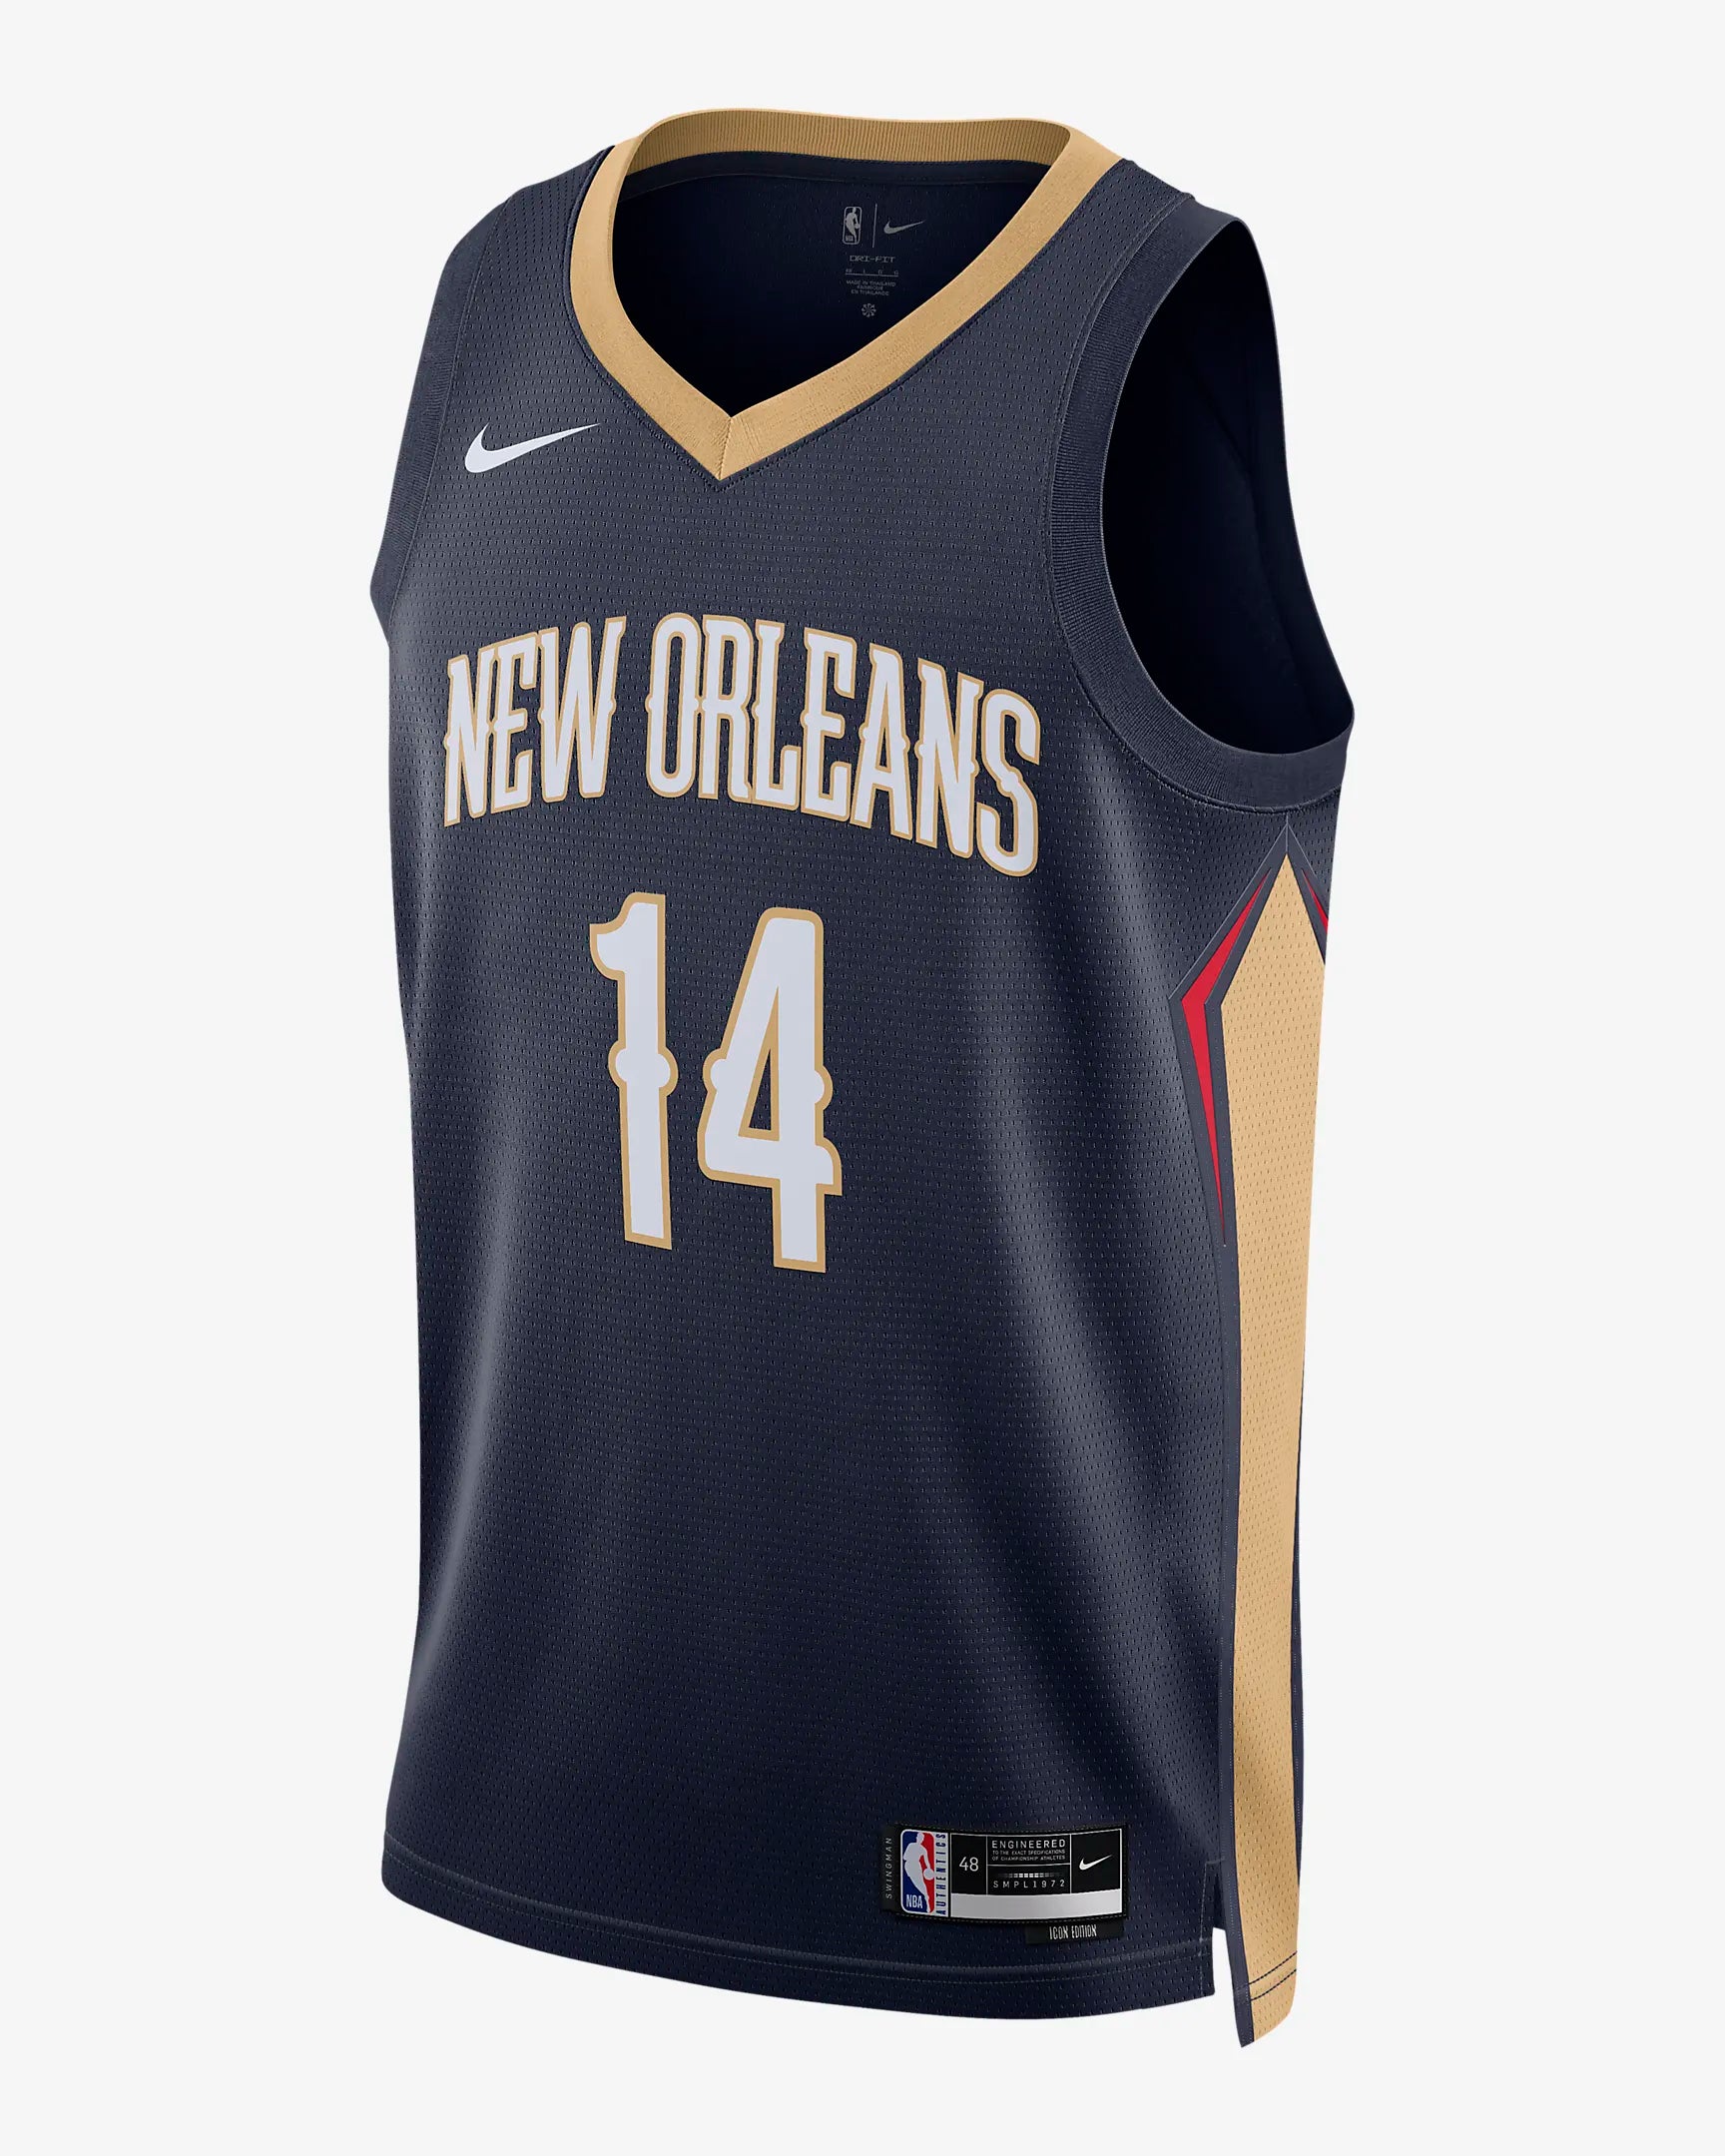 New Orleans Pelicans Still Searching For Identity With City Edition Jerseys